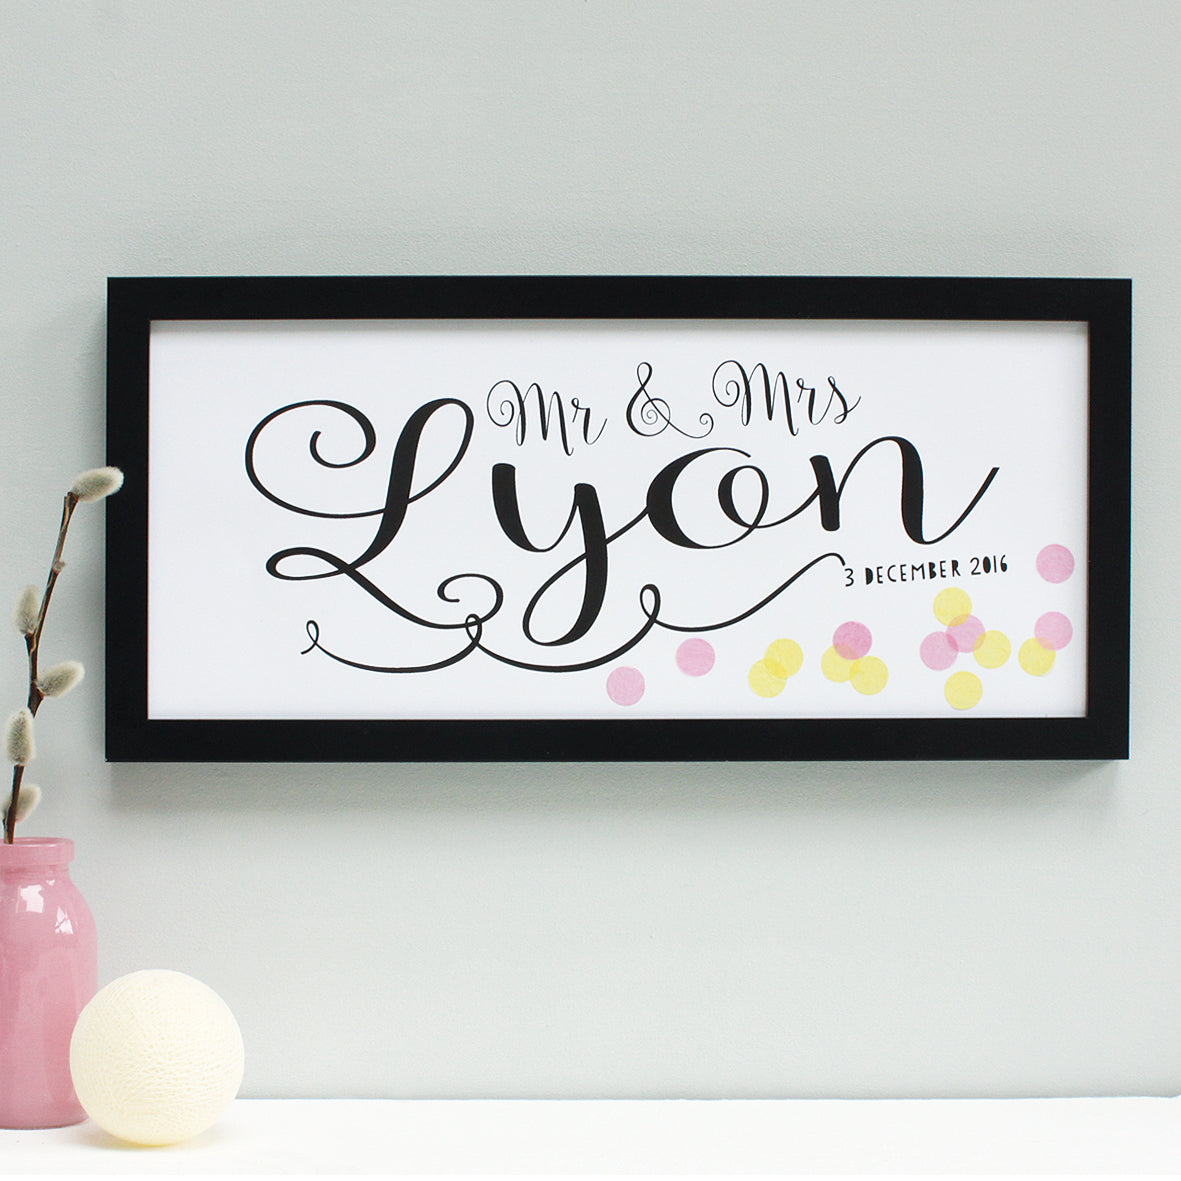 best personalized wedding gifts pink and lemon confetti wedding print, black frame